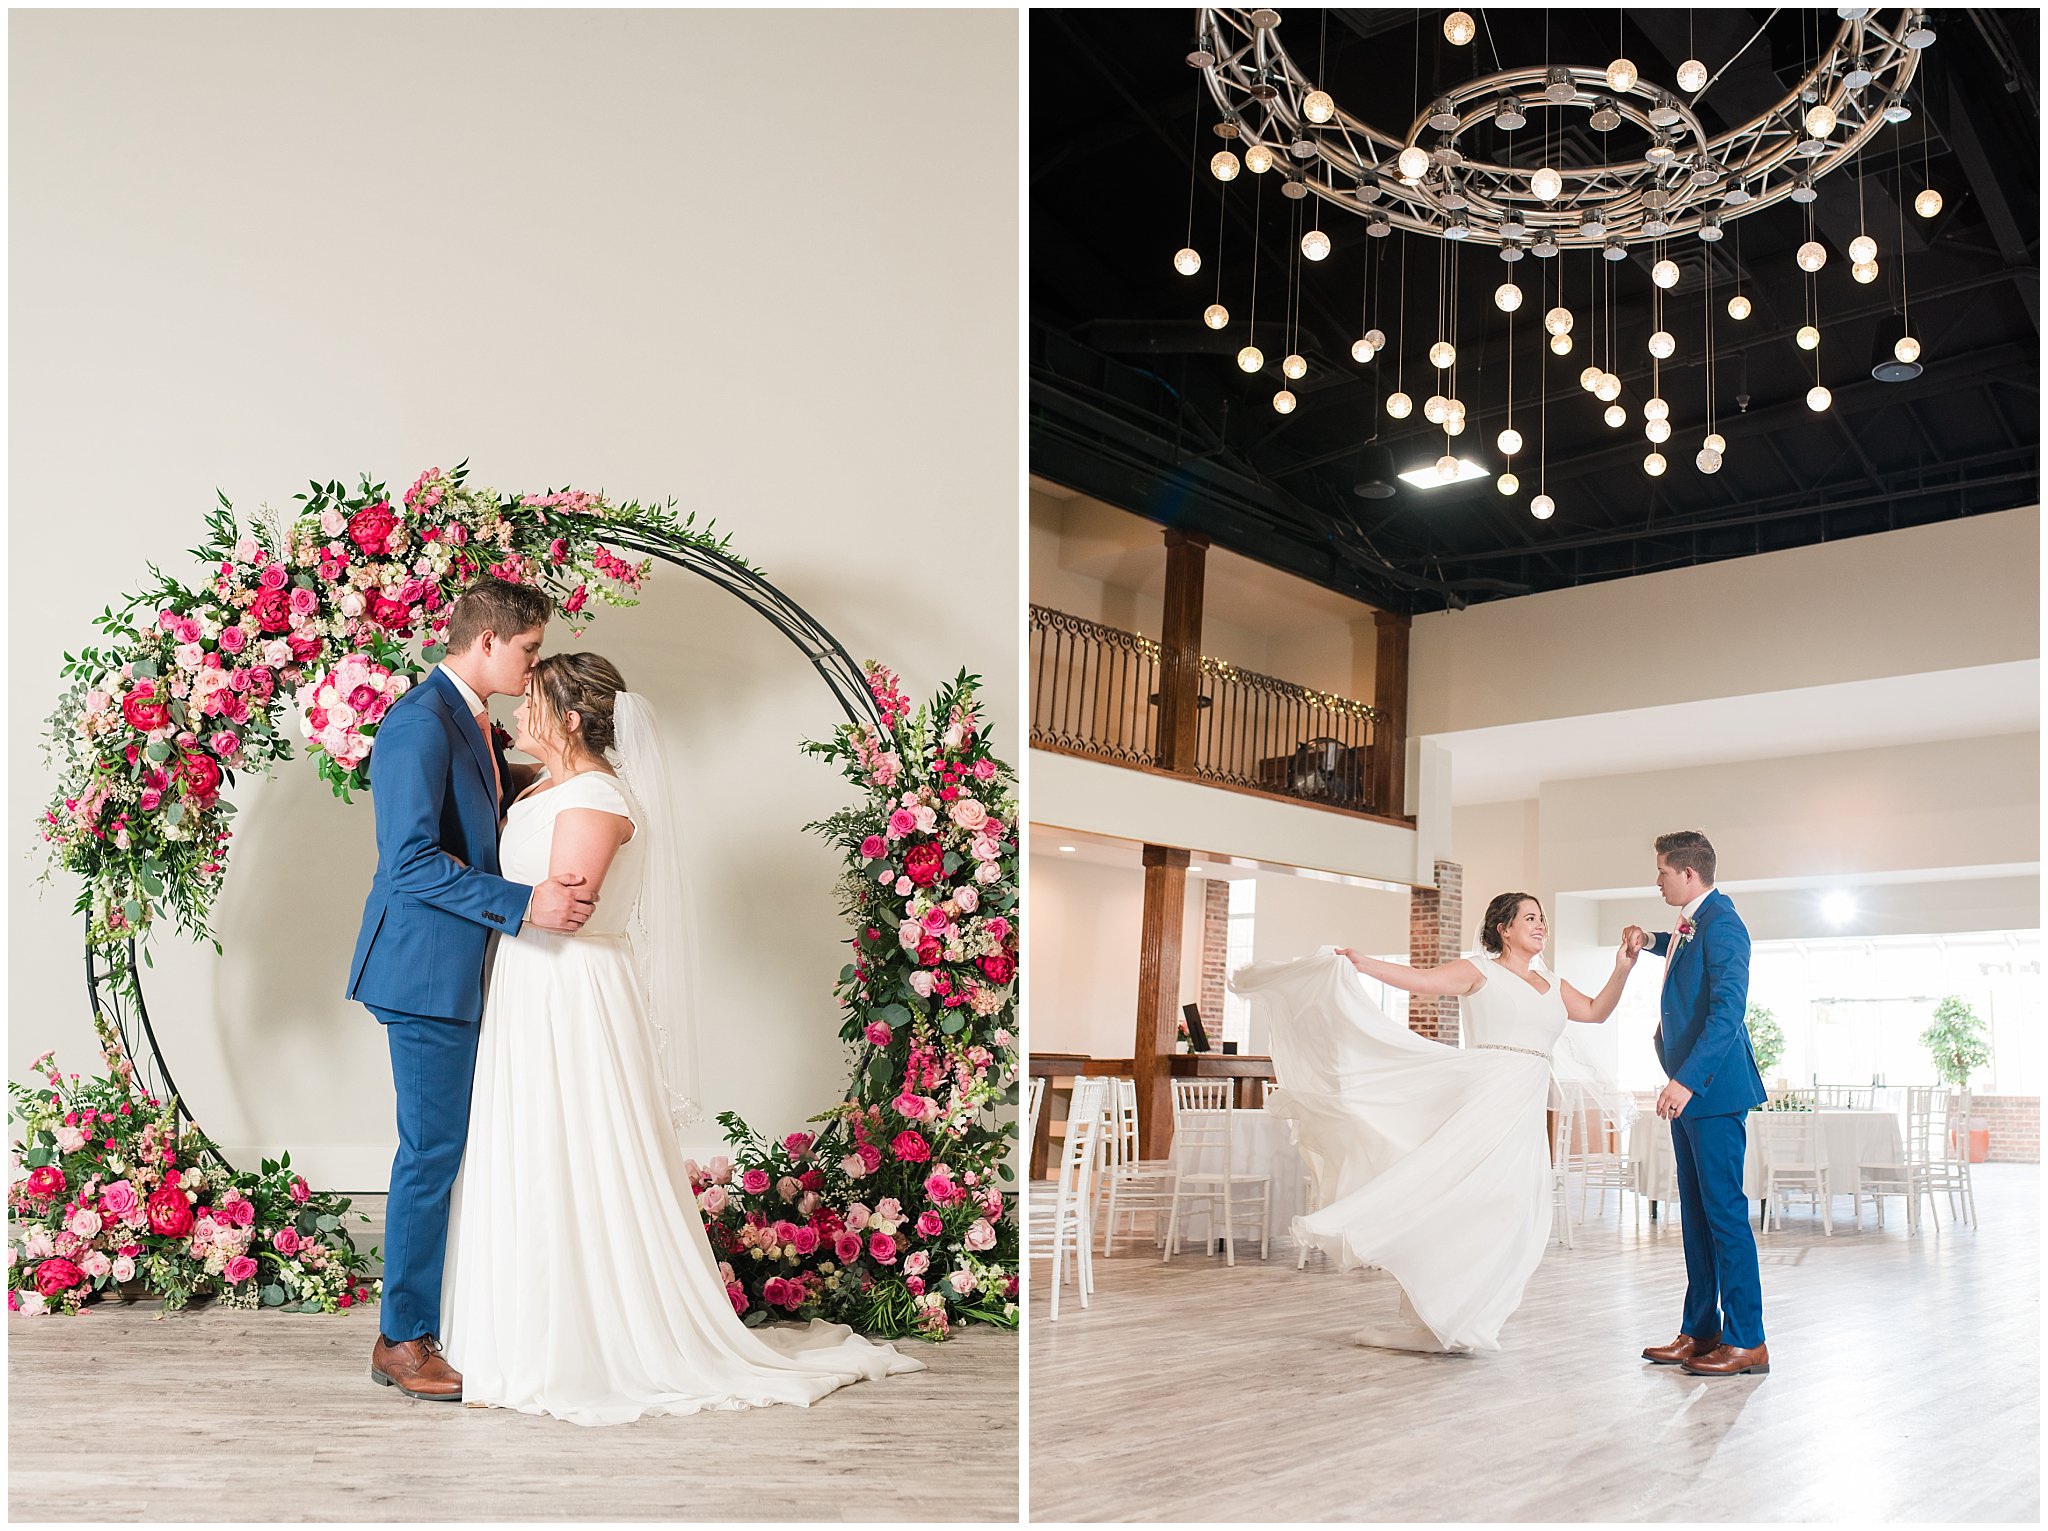 Bride and Groom in front of floral arch in shades of pink wearing flowy dress and cornish blue suit | Talia Event Center Summer Wedding | Jessie and Dallin Photography